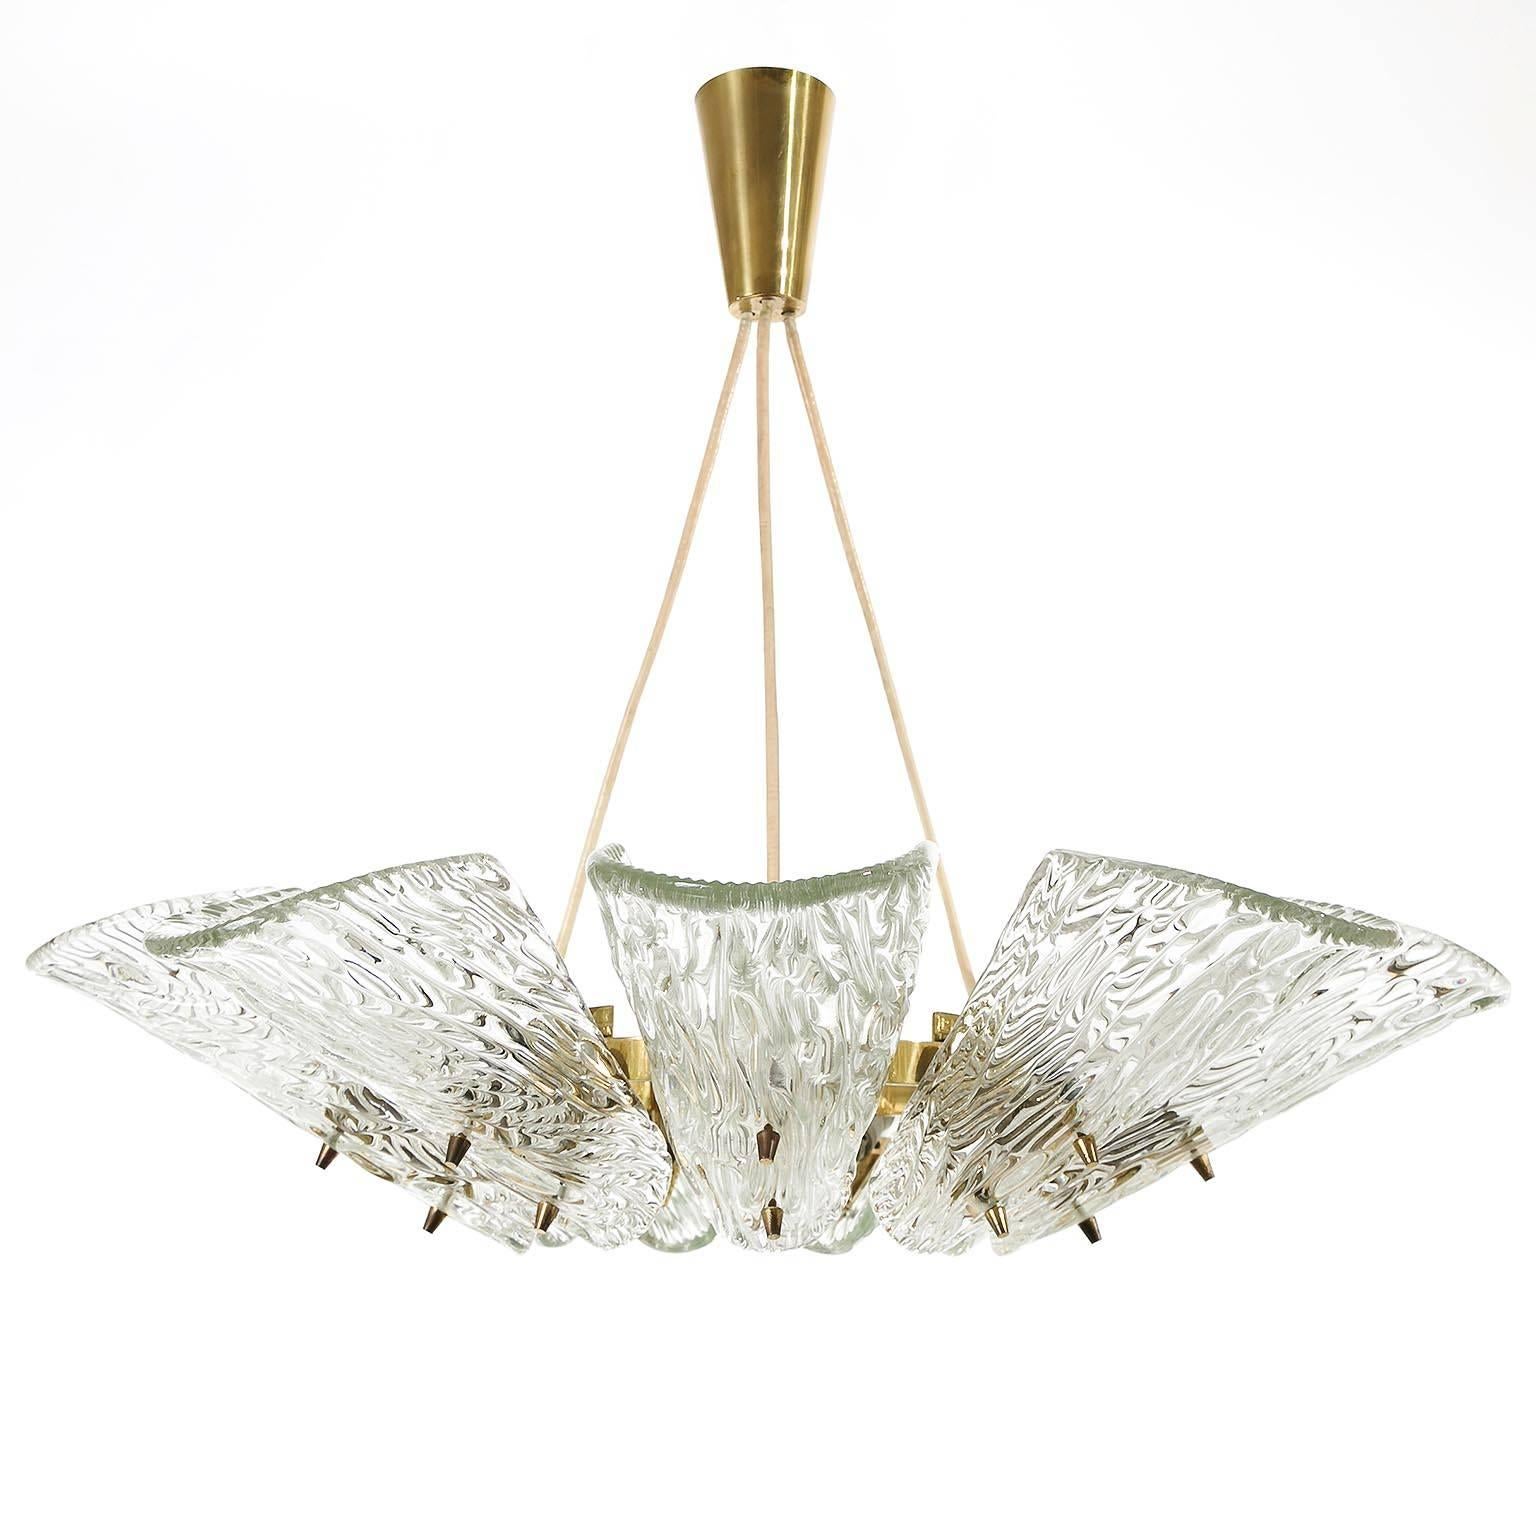 A Viennese textured glass and brass pendant light or chandelier by J. T. Kalmar, Austria, manufactured in midcentury, circa 1960 (late 1950s or early 1960s). 
This fixture is an impressive and handmade piece. It features nine arms with sockets for